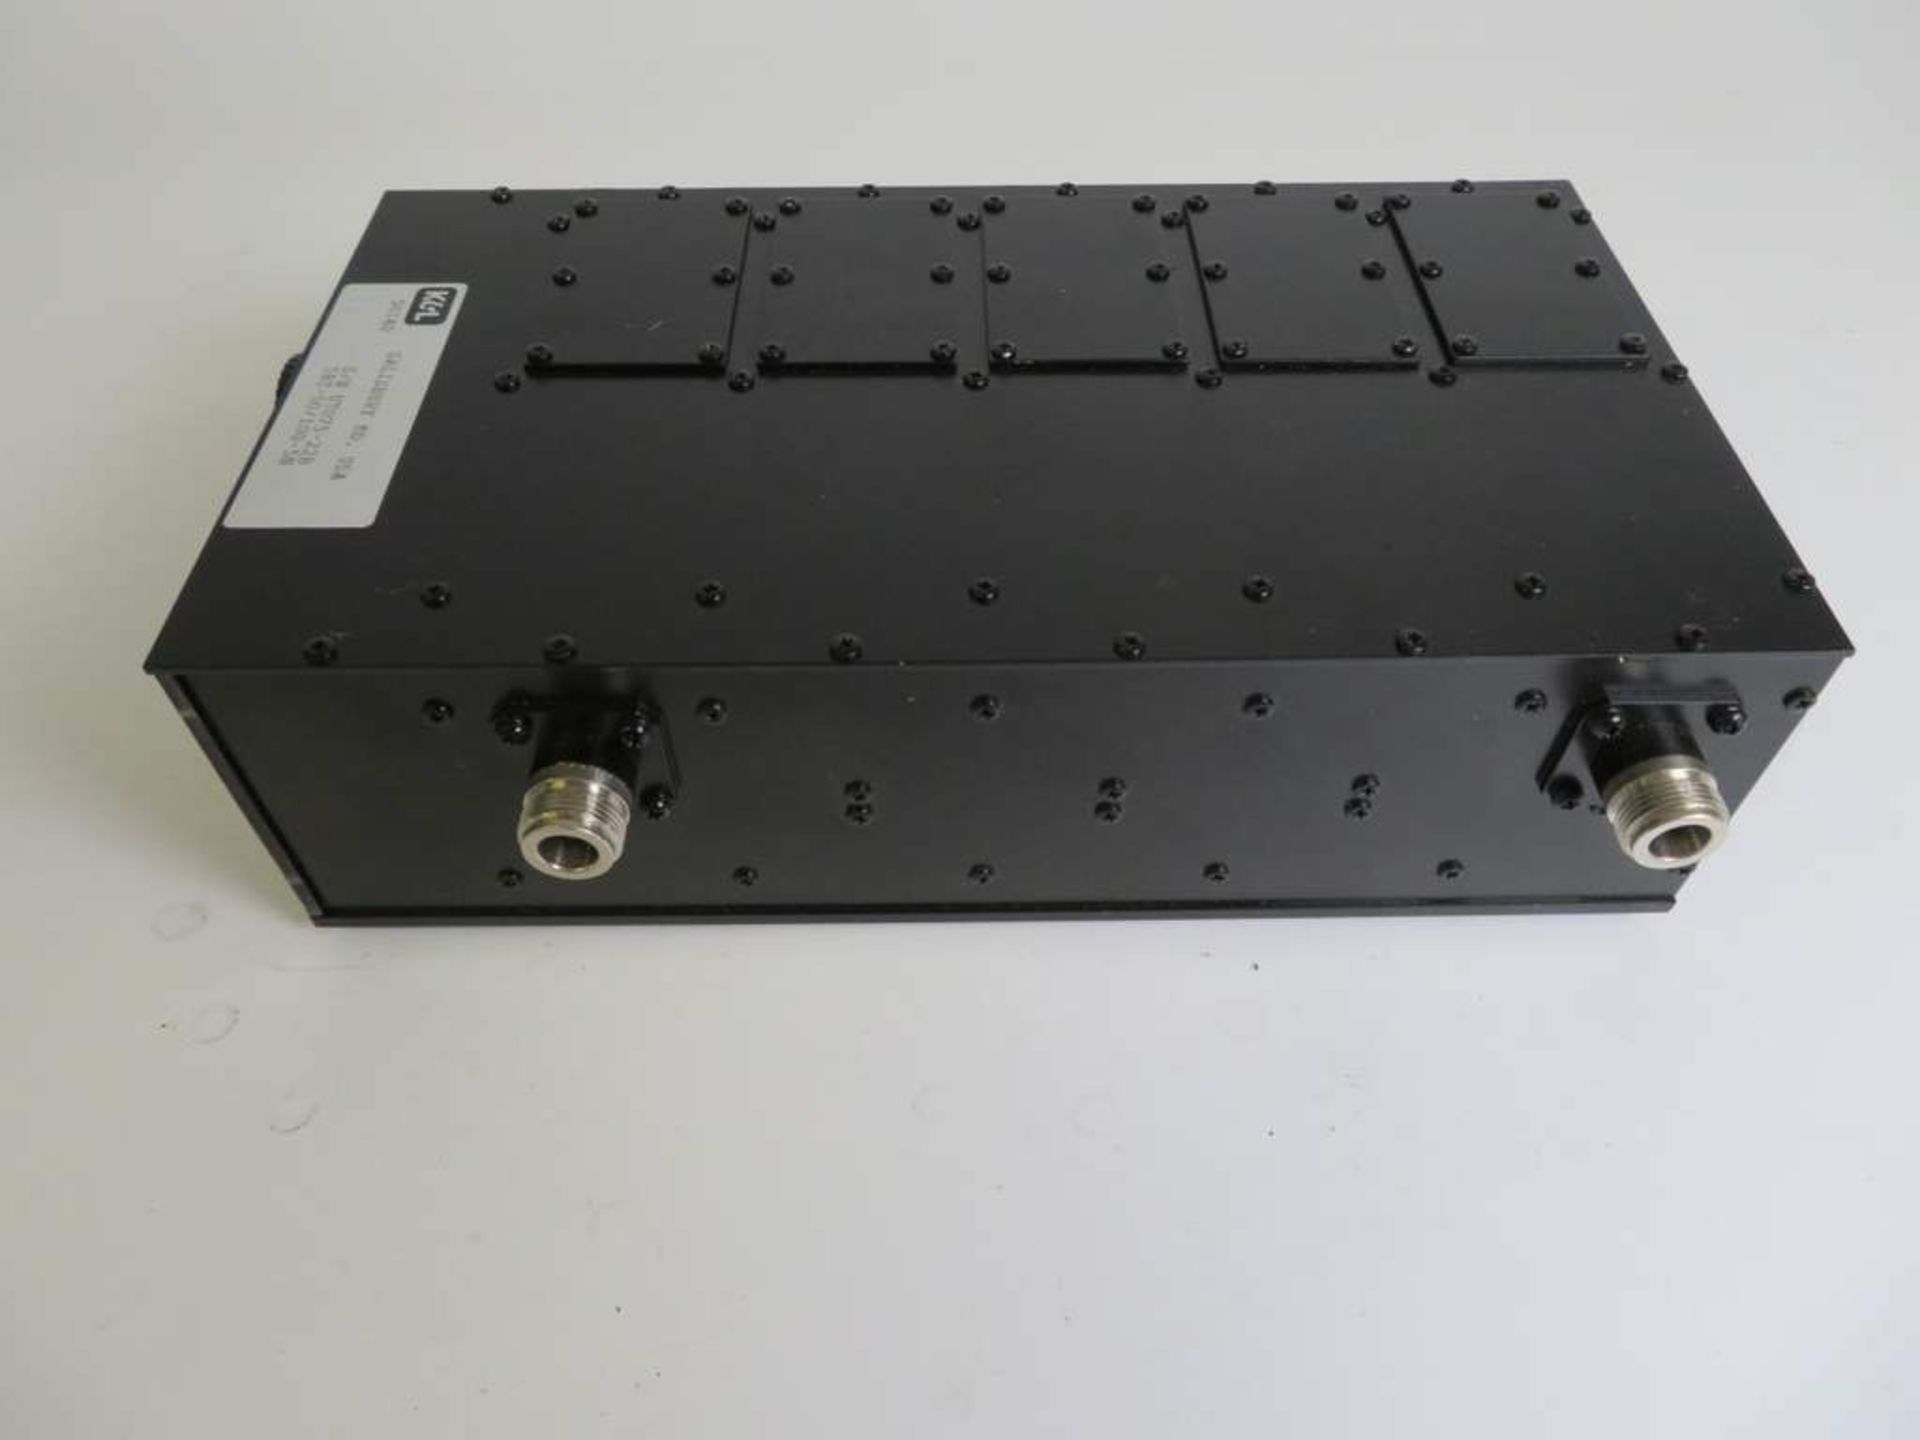 K&L 5BT-50/100-5N Tunable Bandpass Filter - Image 4 of 4